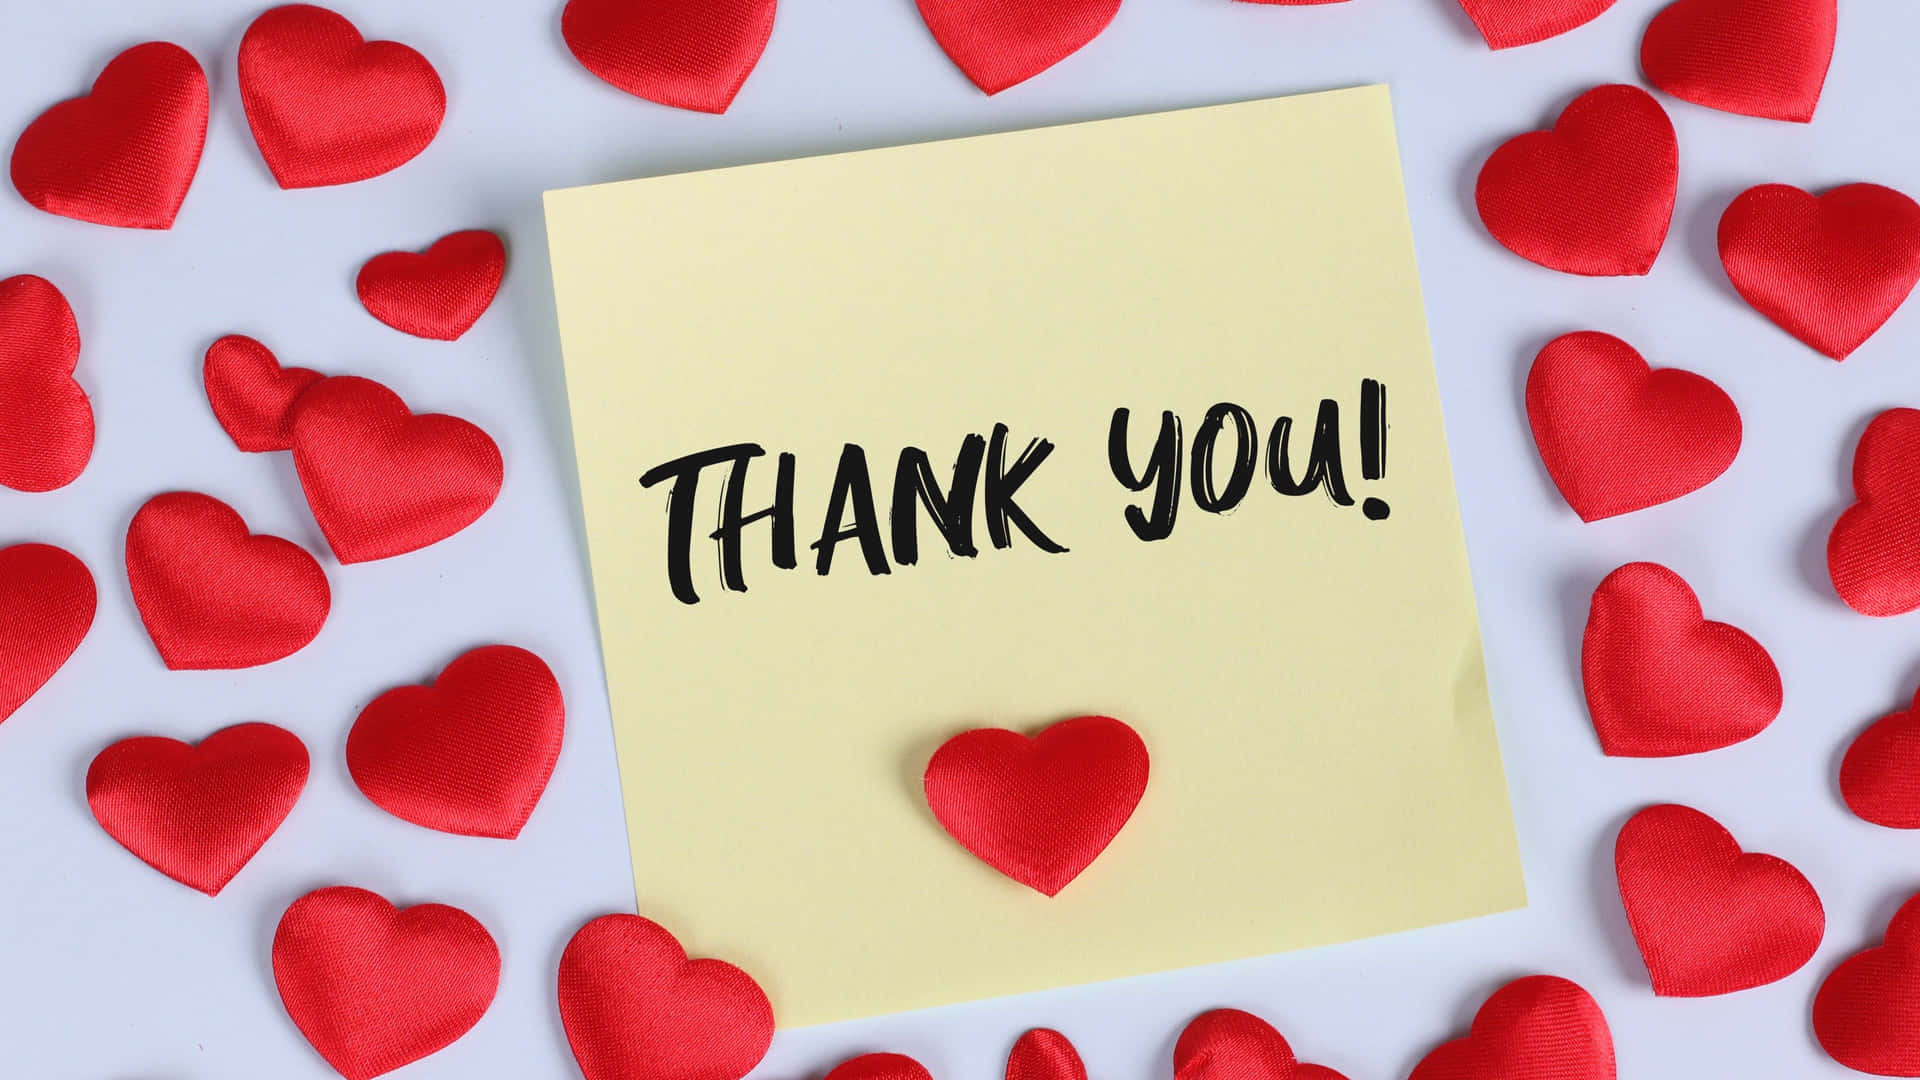 thank you note with red hearts on white background